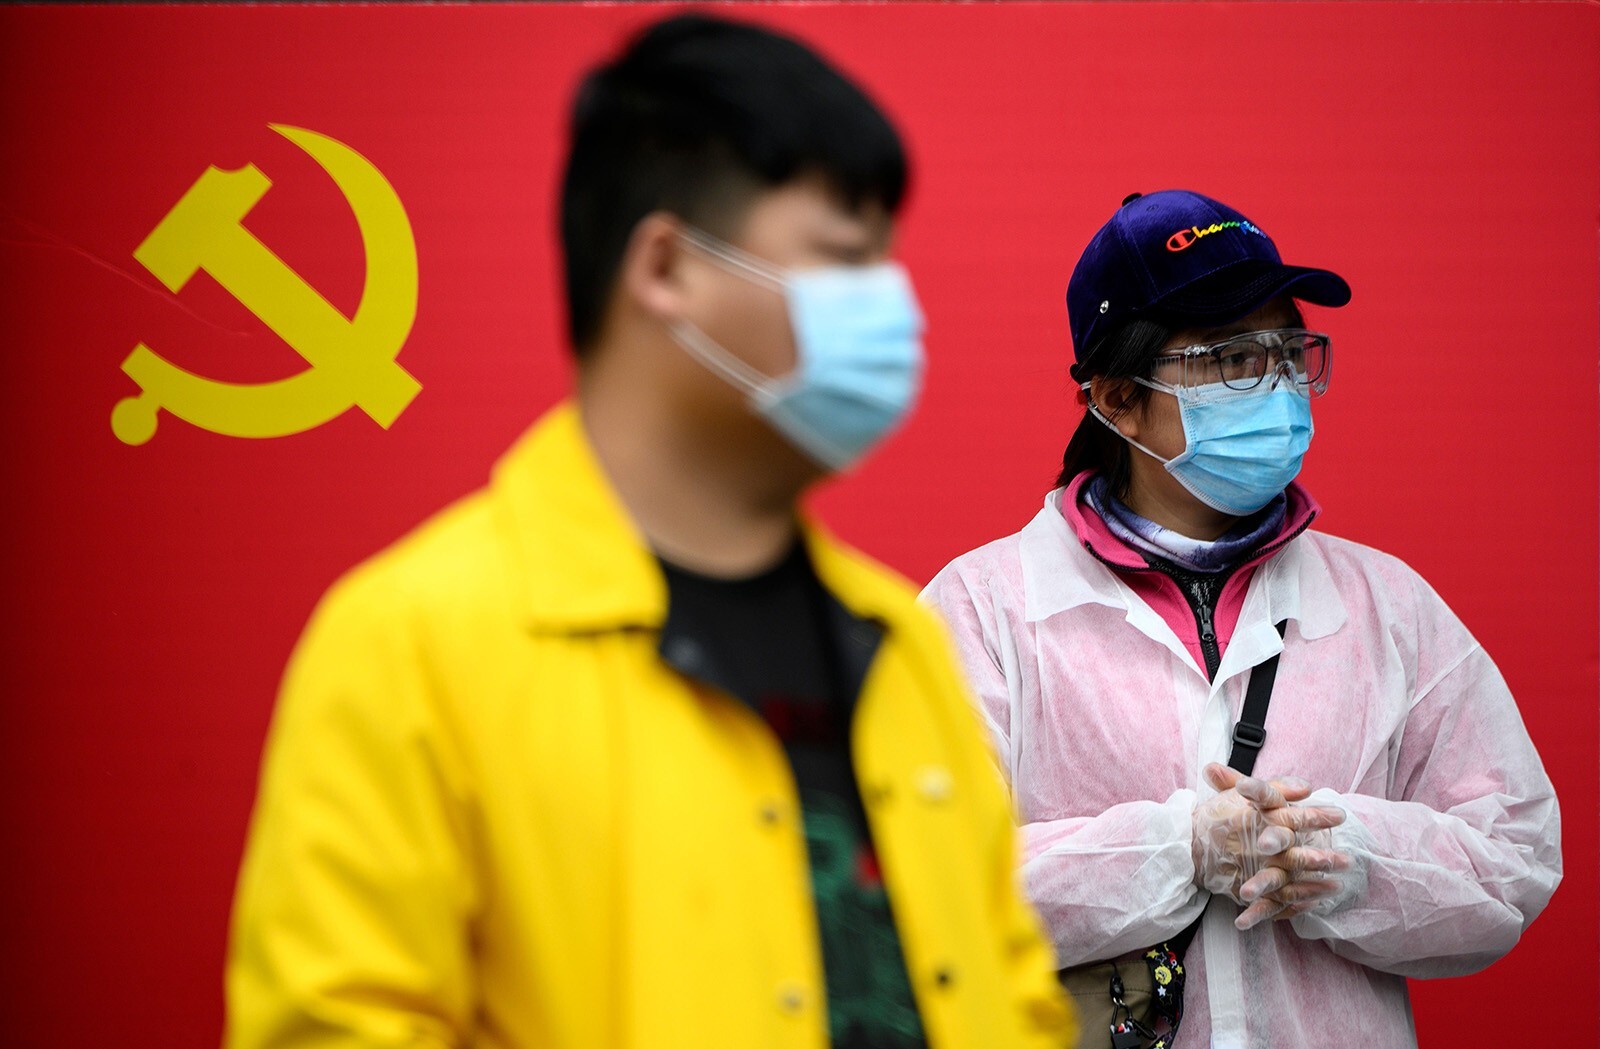 Obtaining the right to reside in China for most professionals is difficult under current laws. Photo: AFP